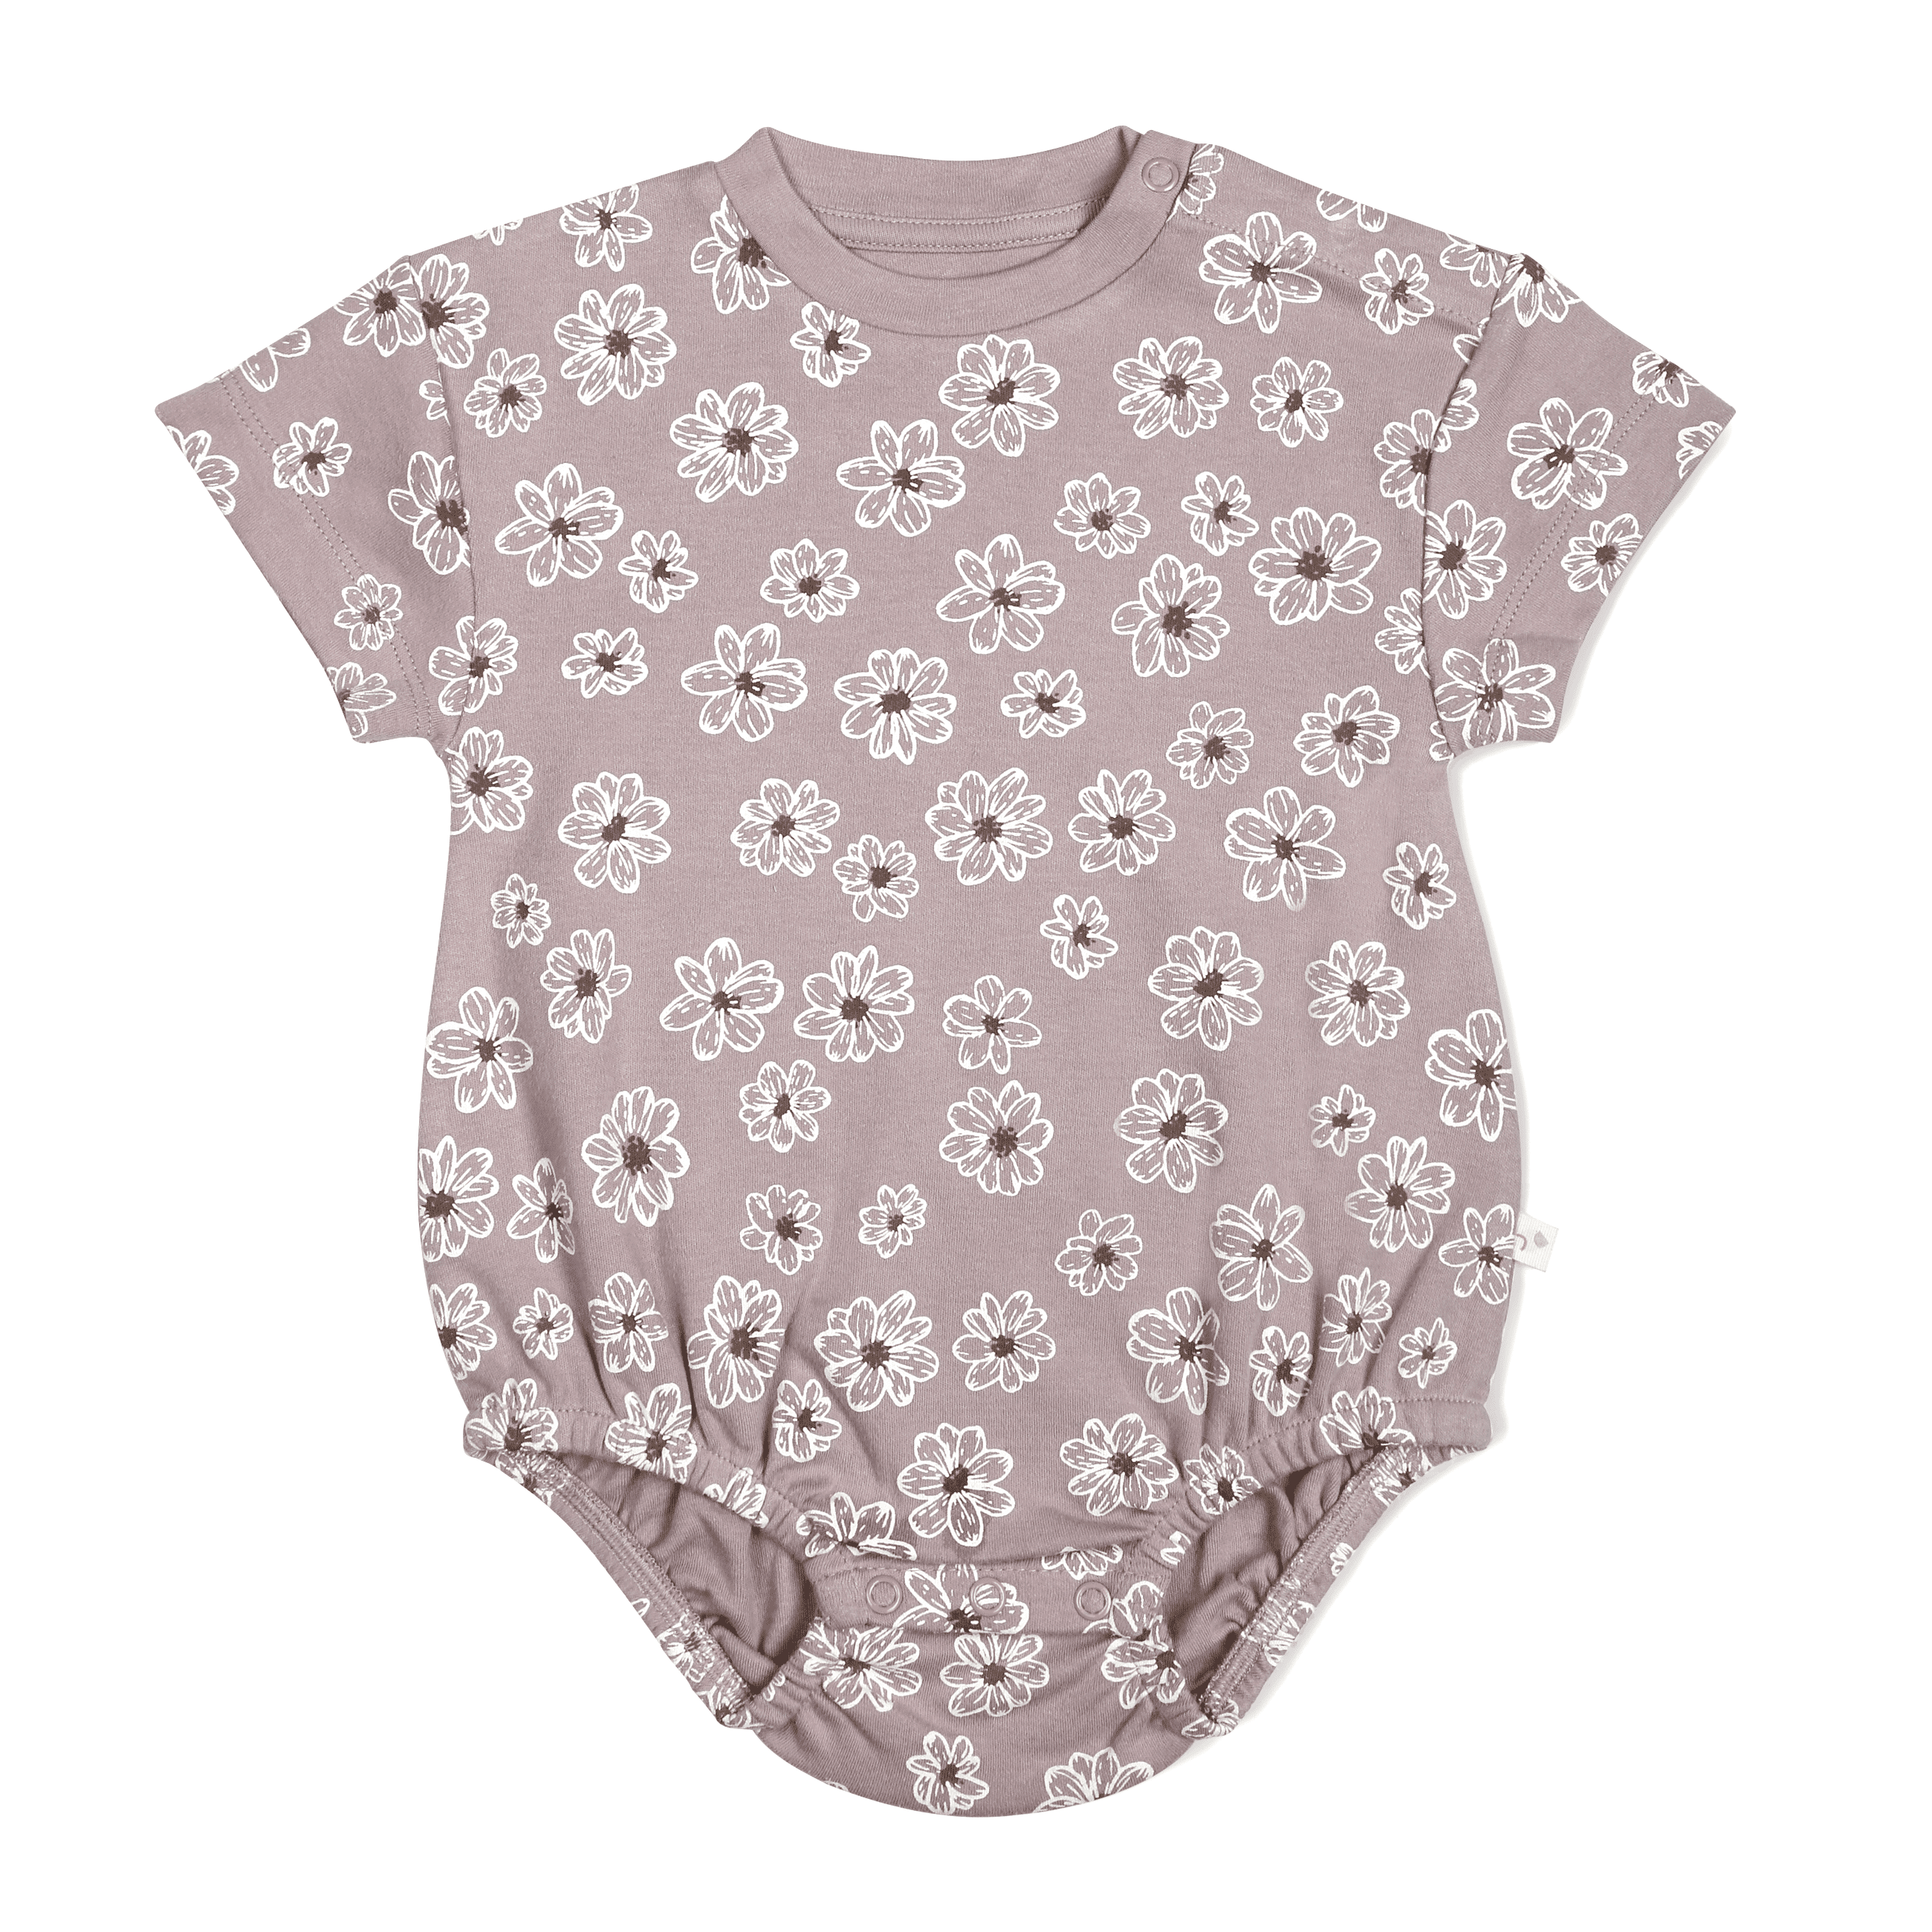 A toddler's short-sleeved bodysuit in a soft pink color, featuring an all-over white floral print, displayed flat on a white background. Organic Bubble Romper - Daisies by Makemake Organics.